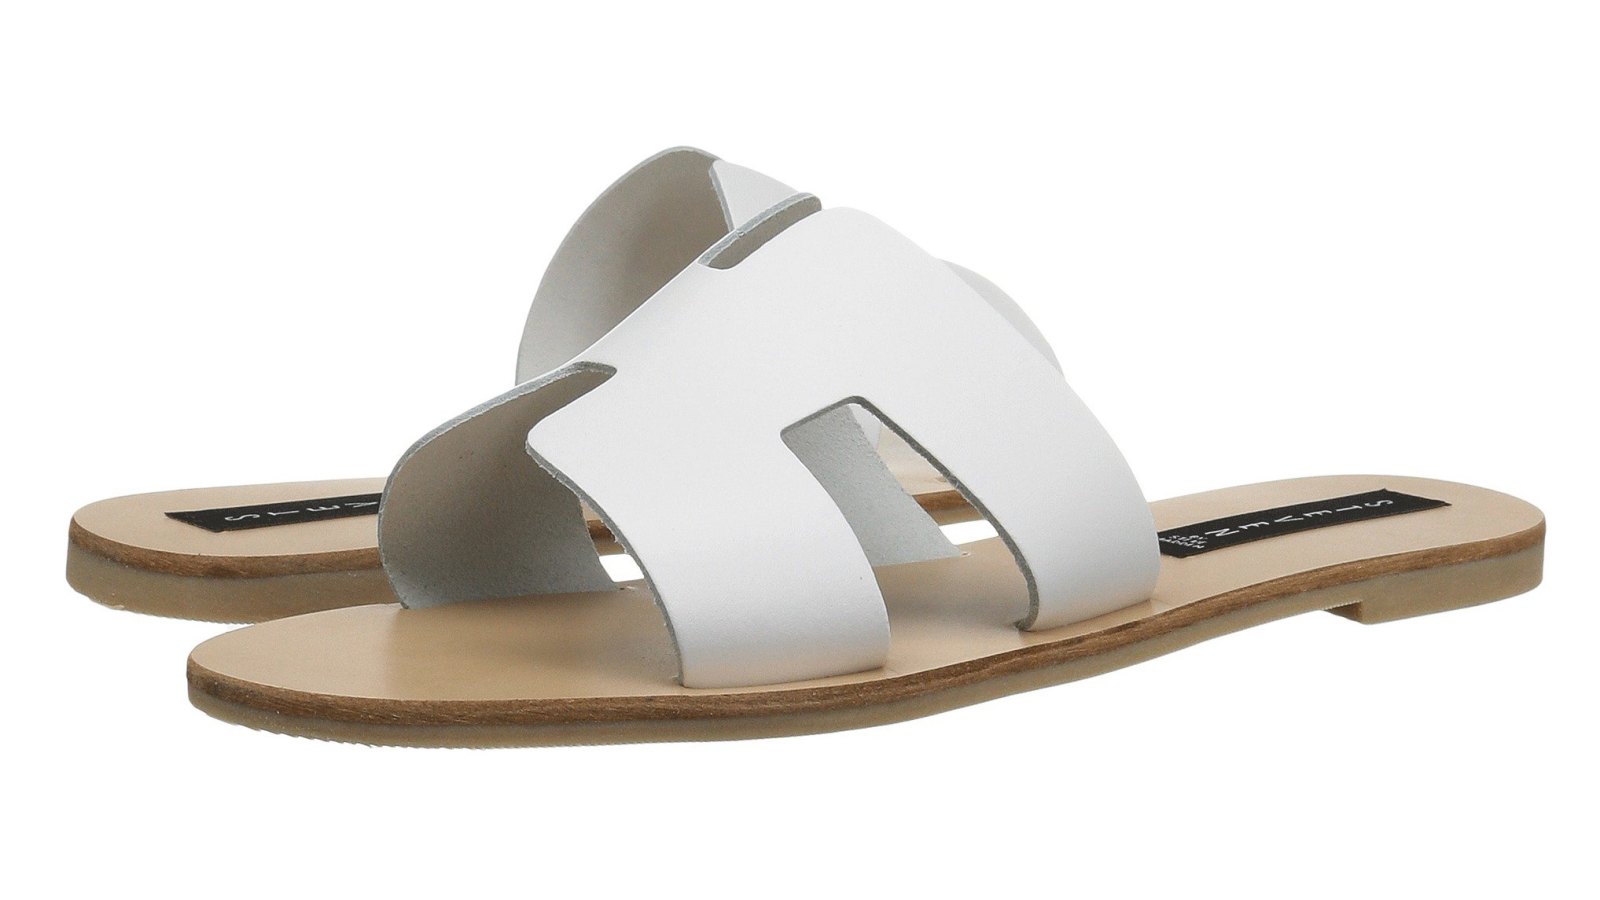 Chic Under $100 Italian-Made Steven Sandals | Us Weekly